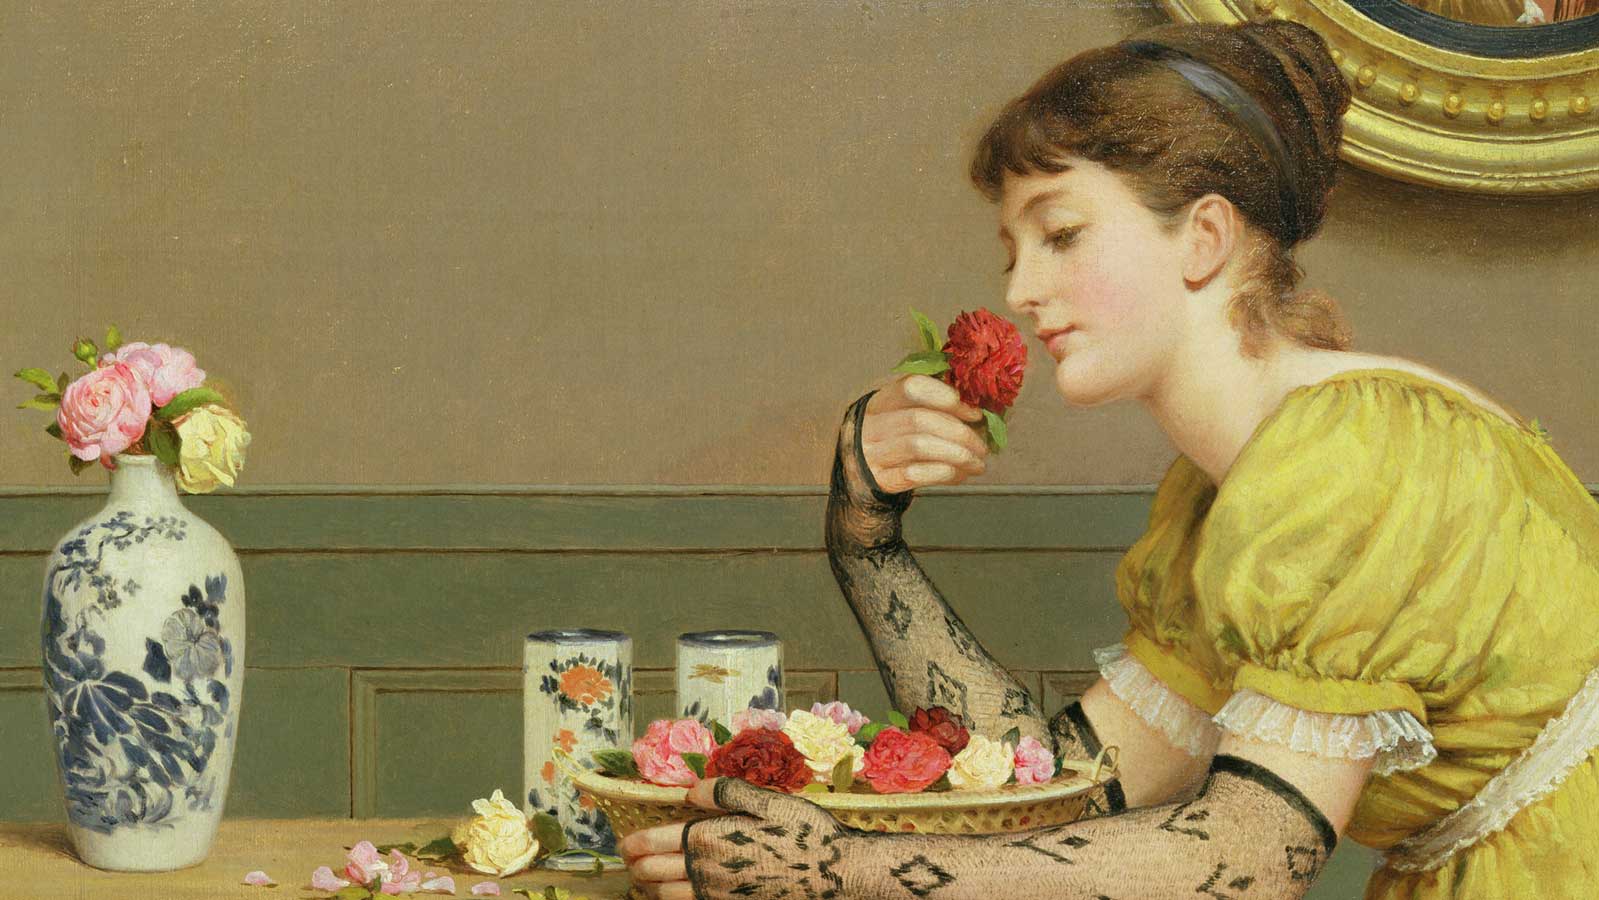 Young girl sits at a table smelling a rose - taken from the cover of Vanity Fair